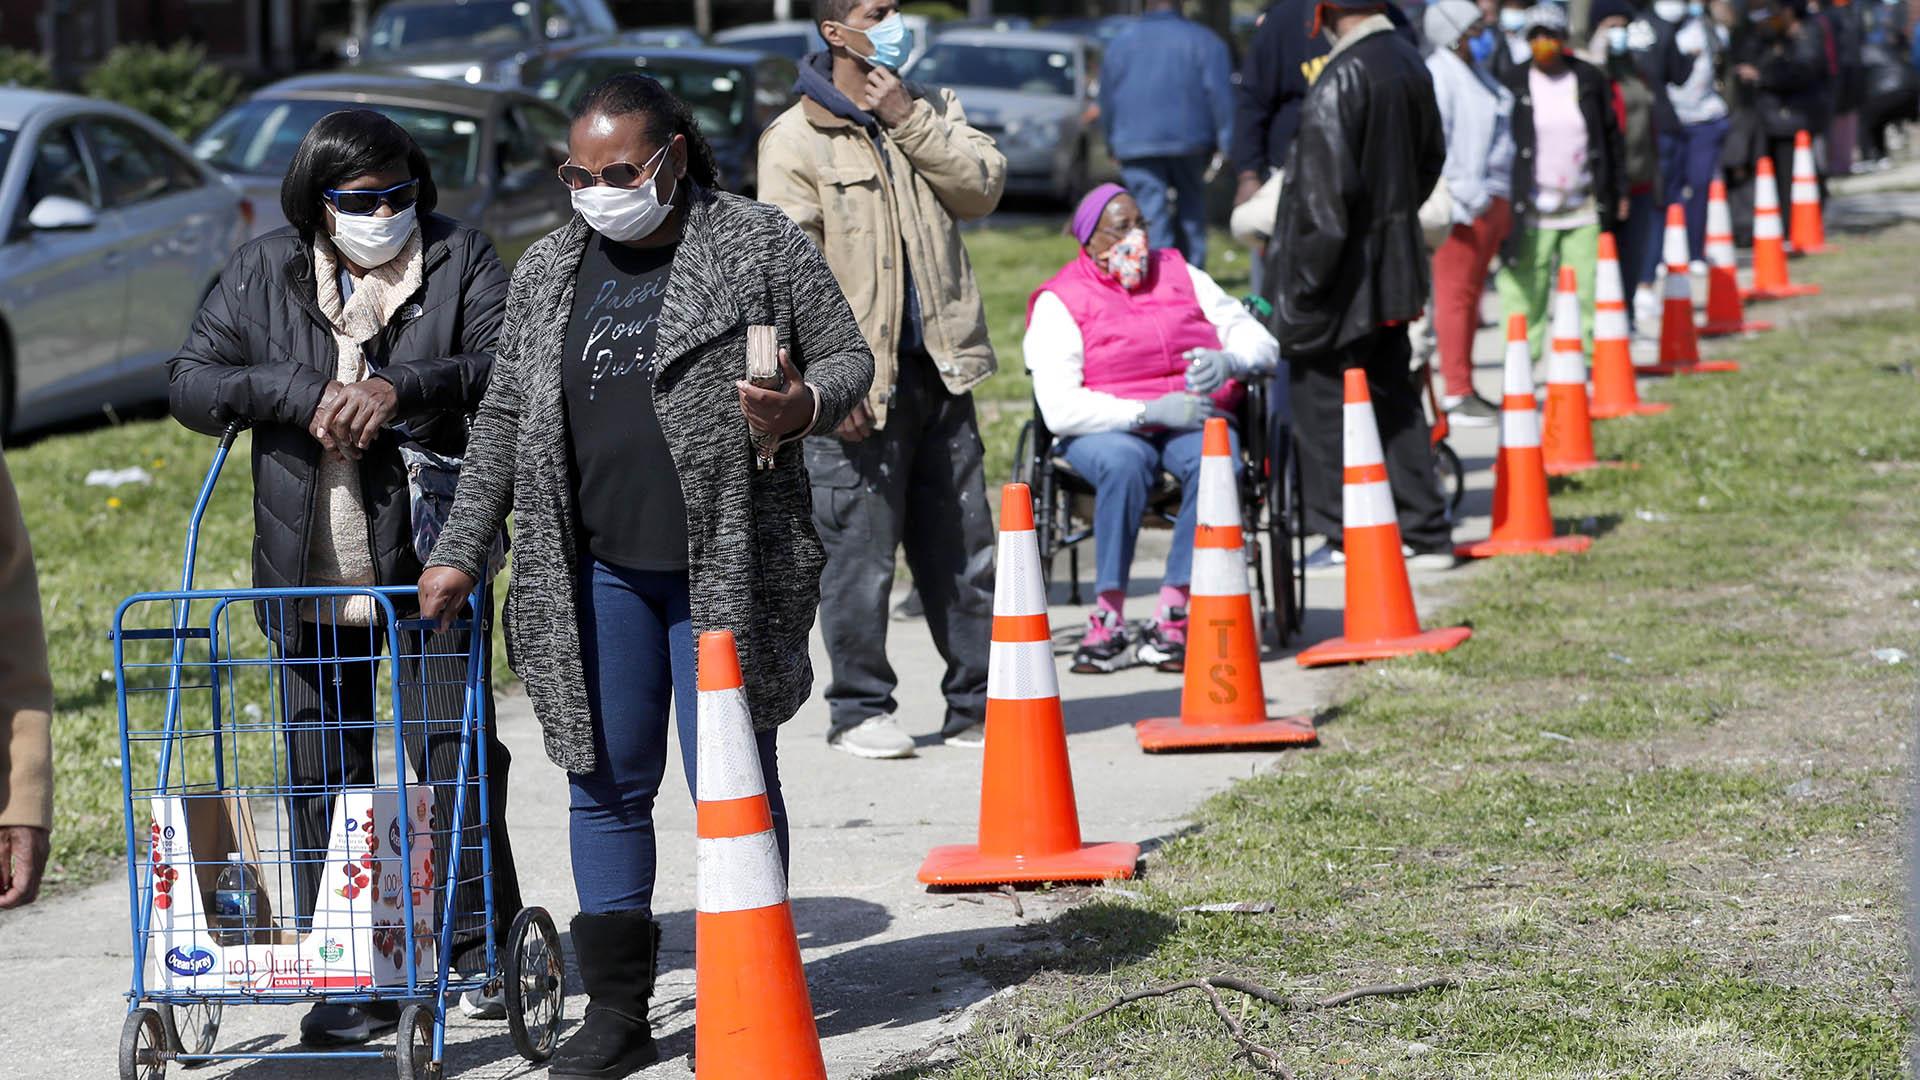 In this Tuesday, May 12, 2020, photo, residents from all walks of life line up for a food giveaway sponsored by the Greater Chicago Food Depository in the Auburn Gresham neighborhood of Chicago. (AP Photo / Charles Rex Arbogast)